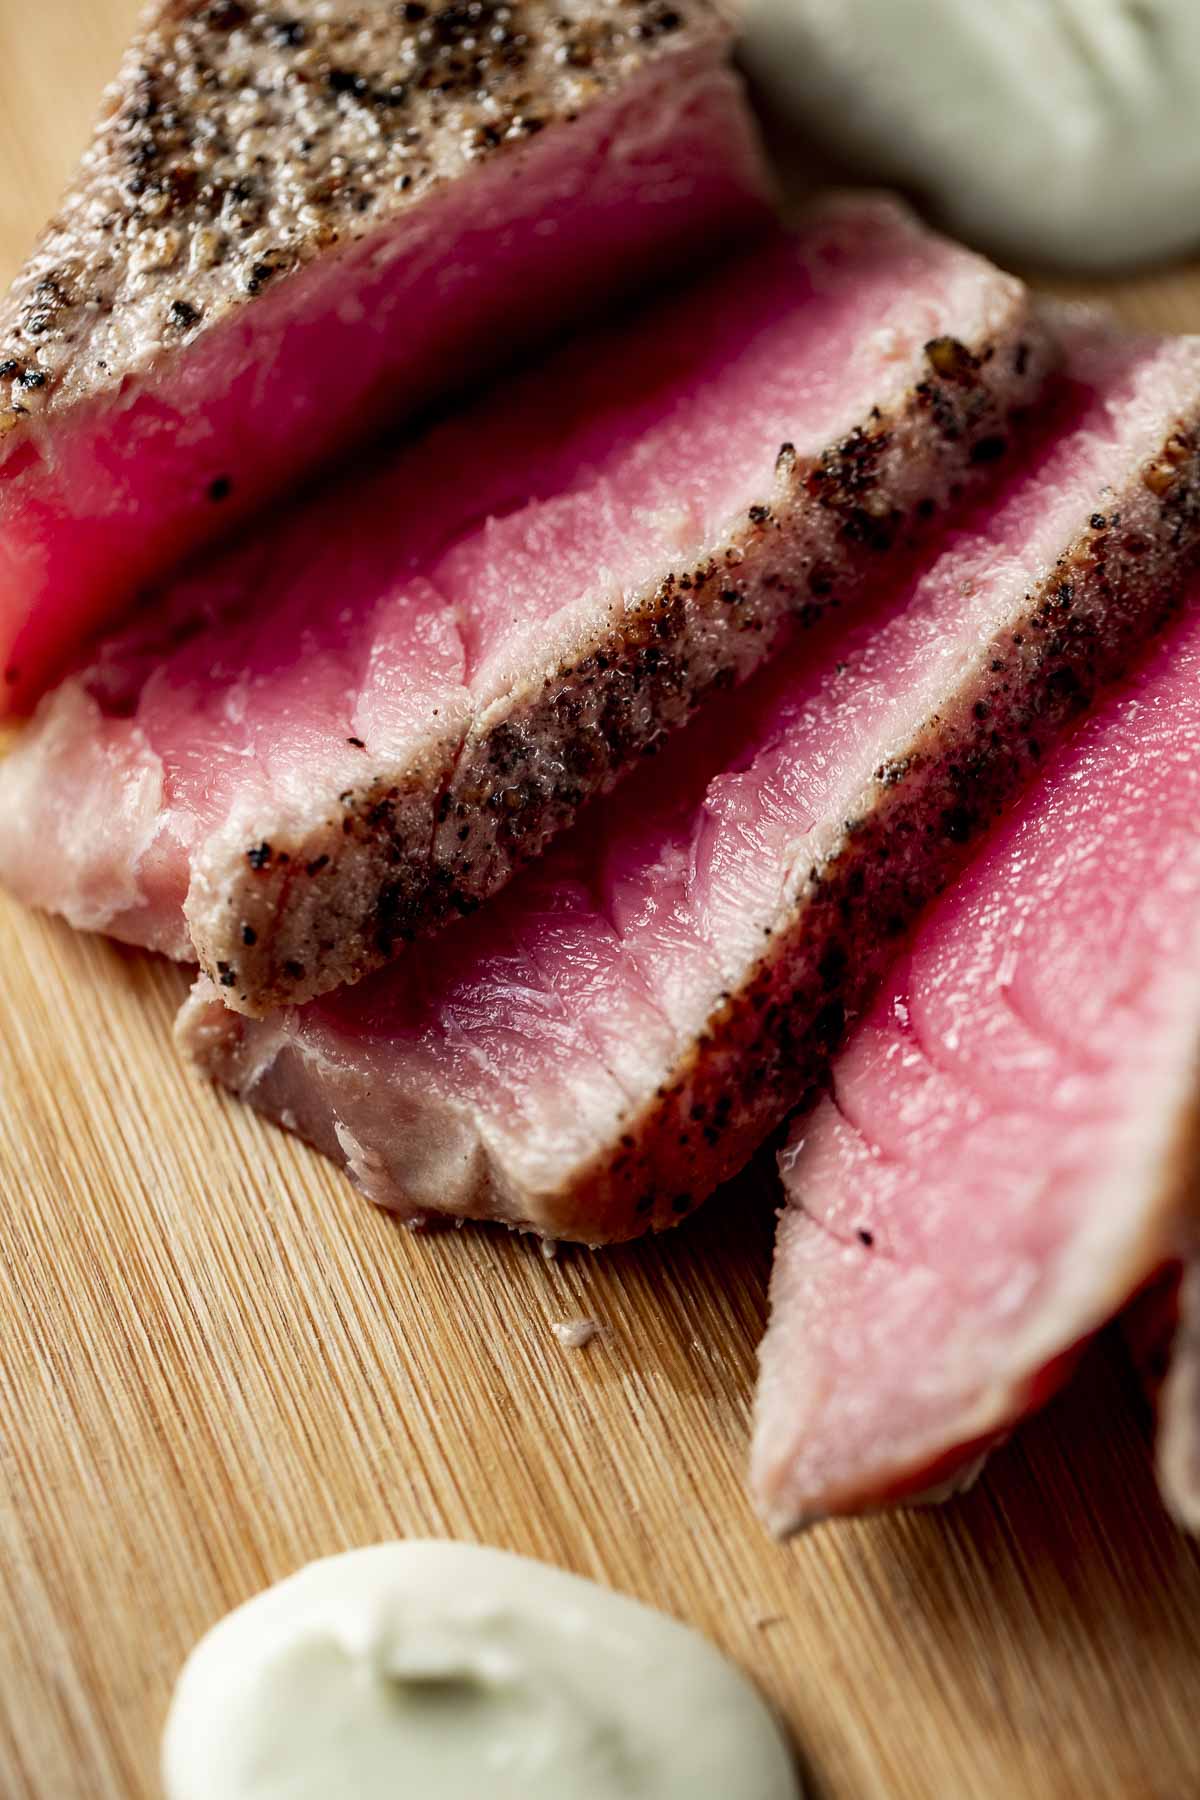 Close up view of slices of sous vide tuna.